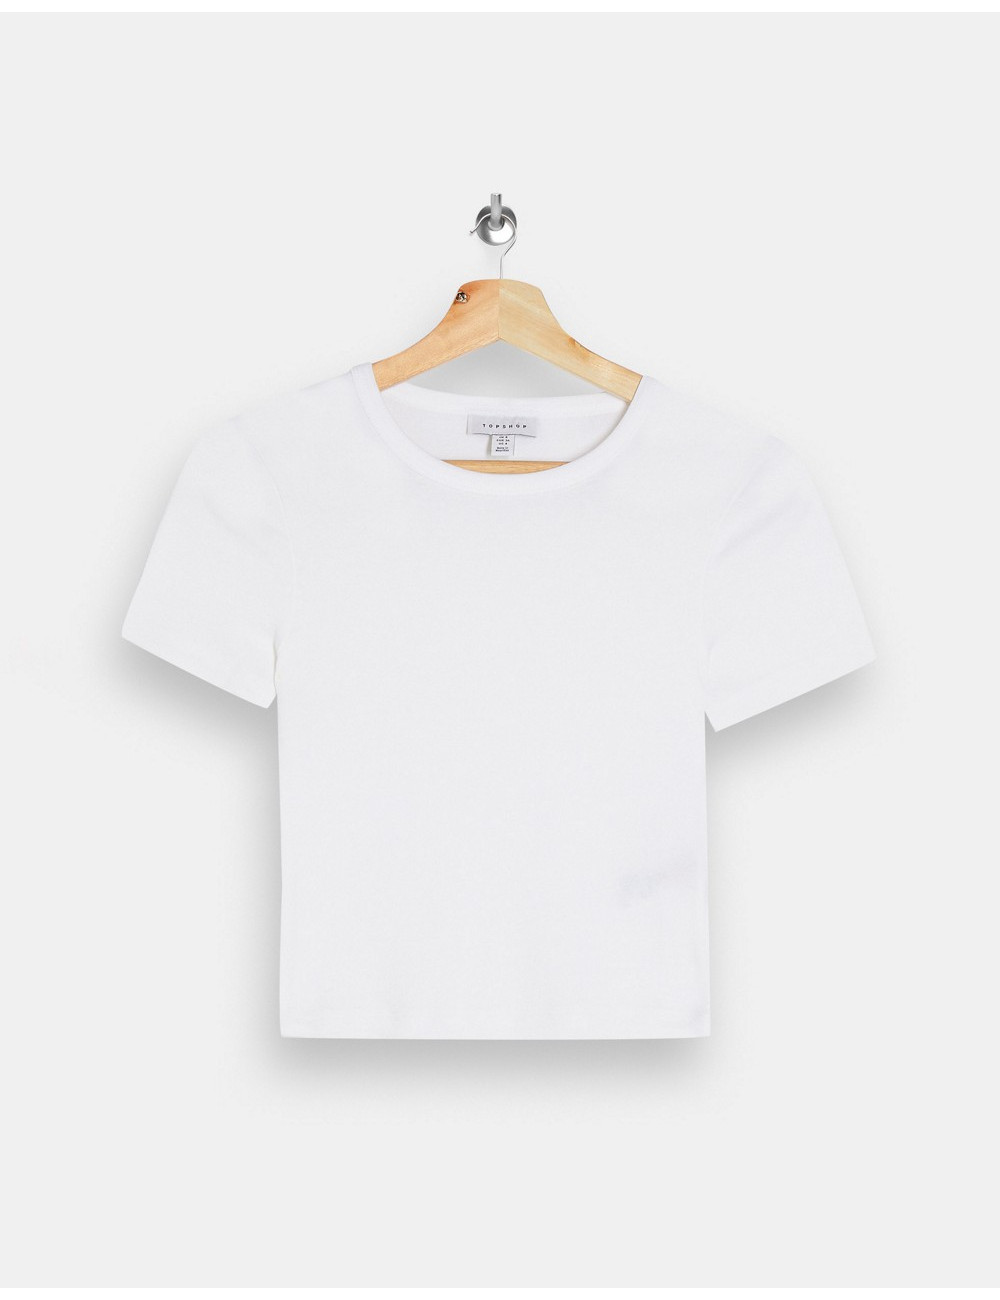 Topshop t-shirt in white